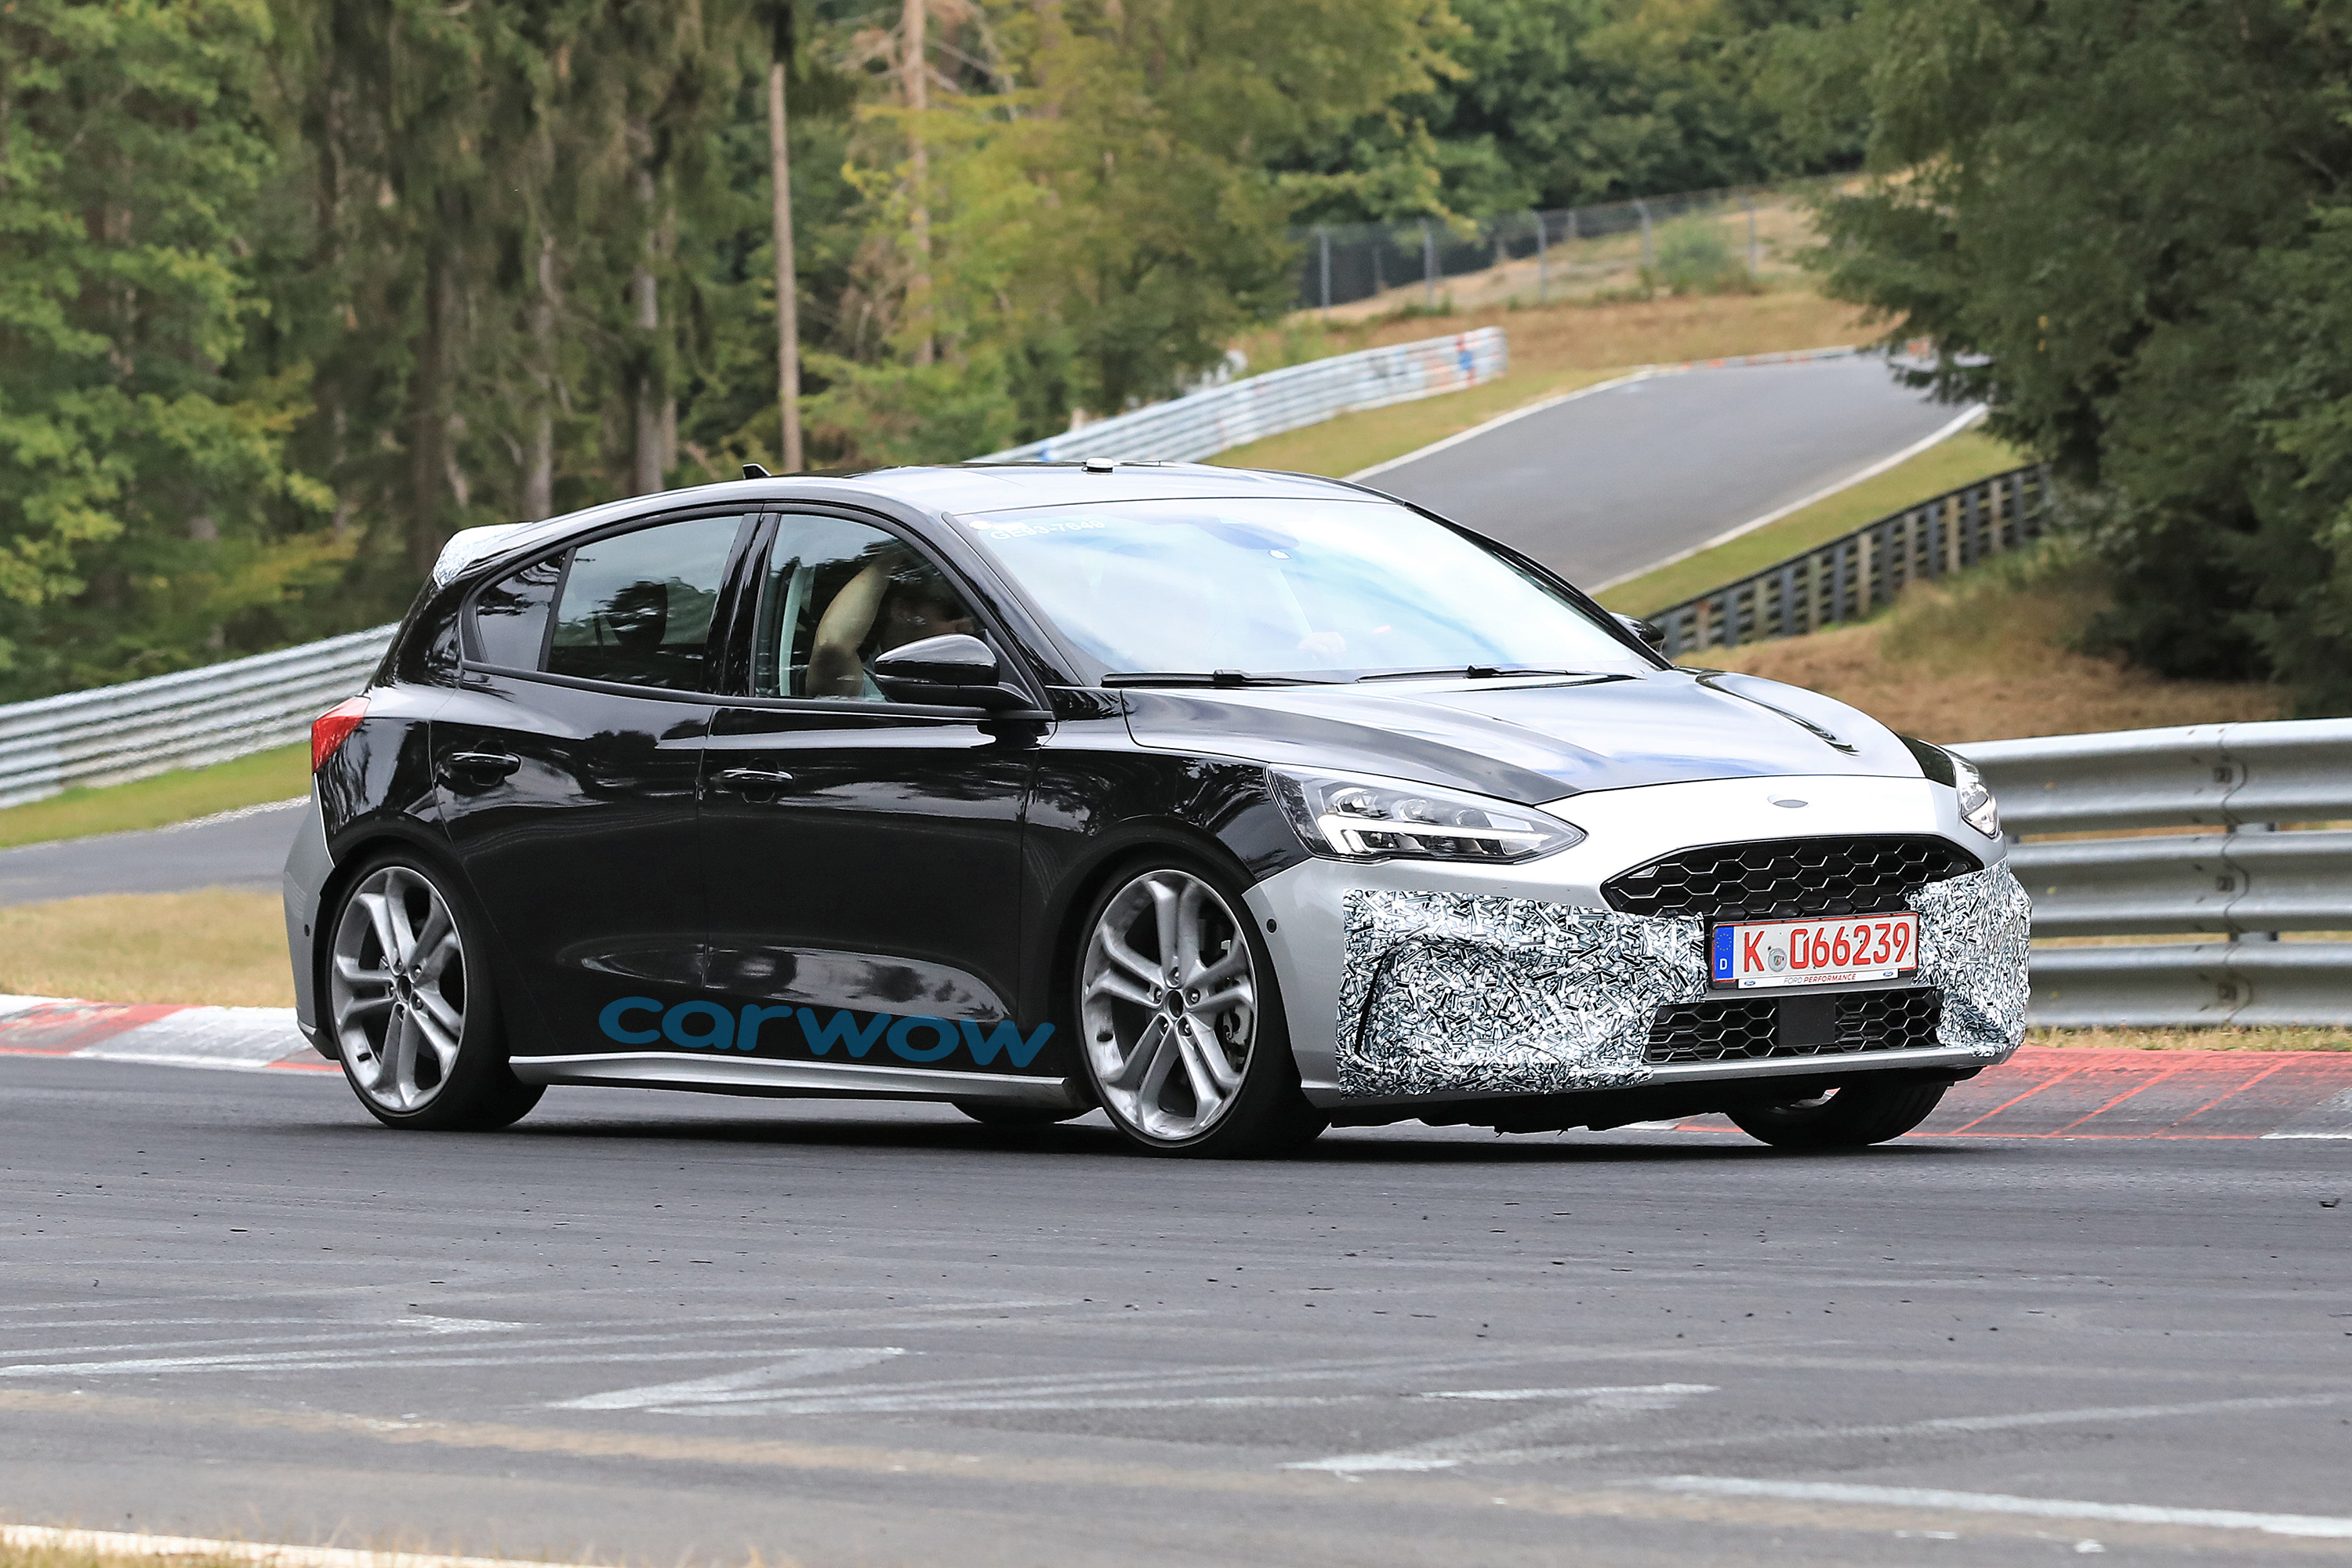 2019 Ford Focus ST price, specs,release date | carwow